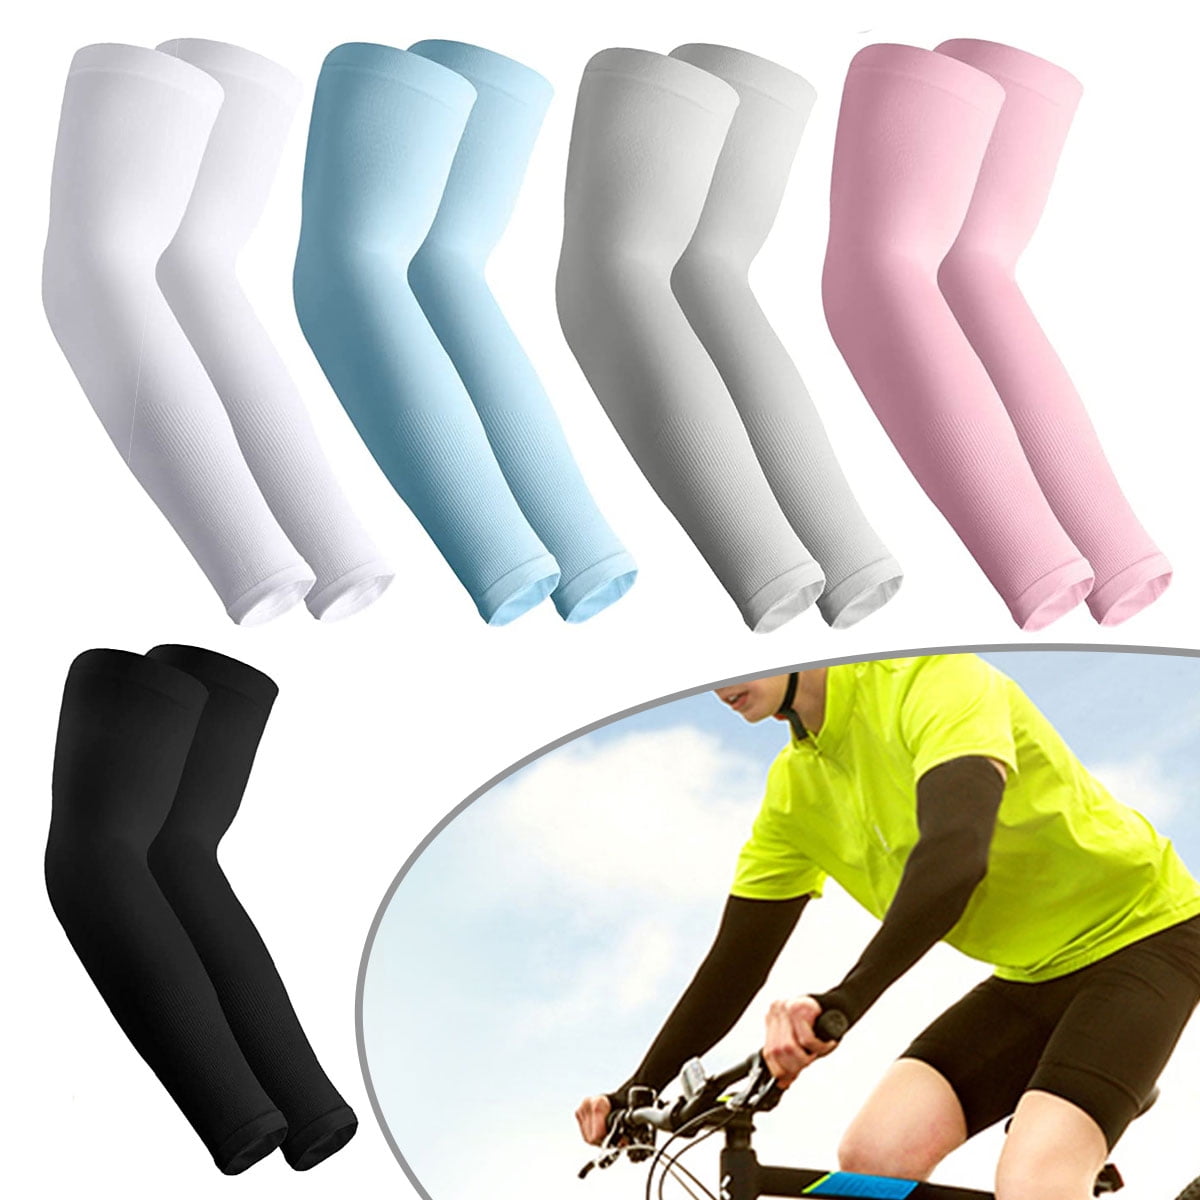 Cooling Arm Sleeves Cover UV Sun Protection Outdoor Sports For Men Women 5 Pairs 